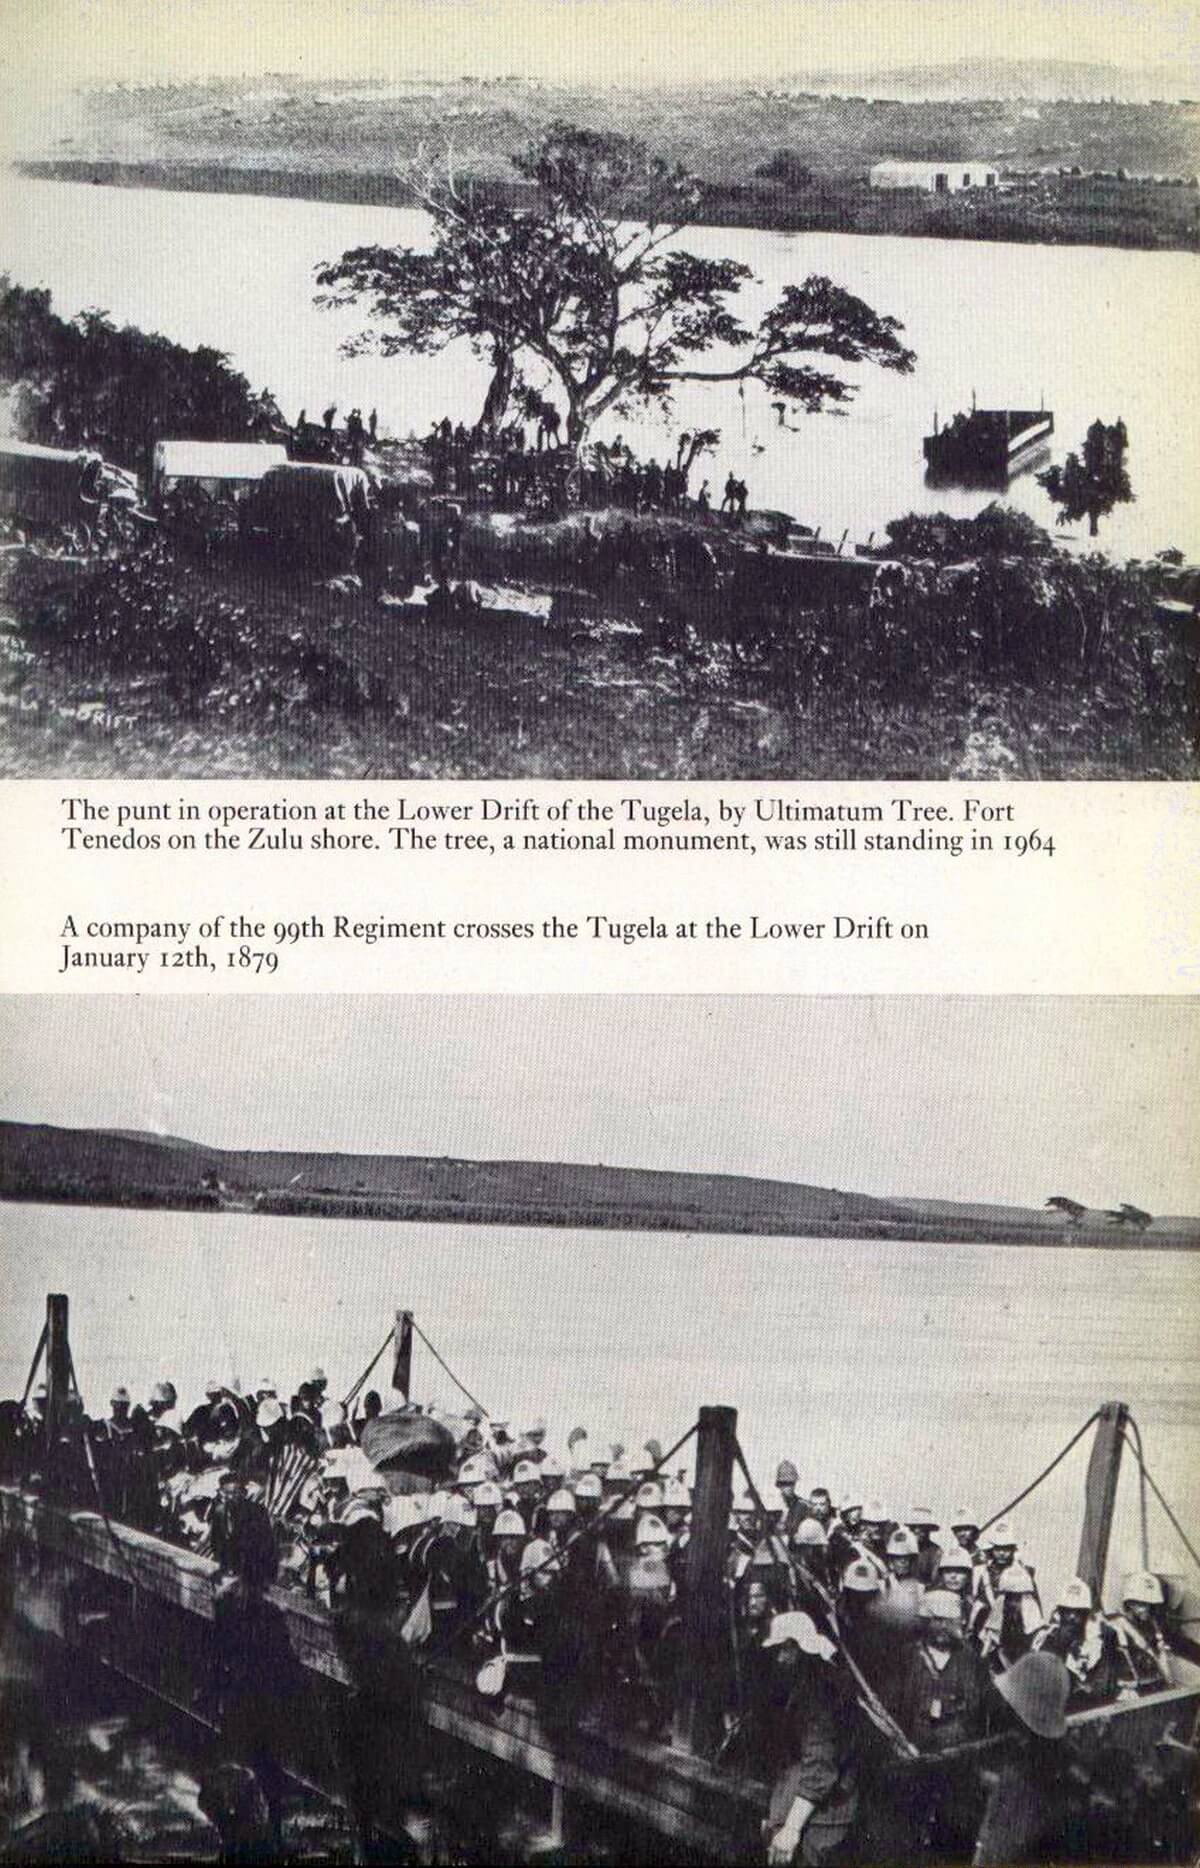 Photos of the Crossing of the Tugela at the Lower Drift (from Donald R Morris’s 'The Washing of the Spears’